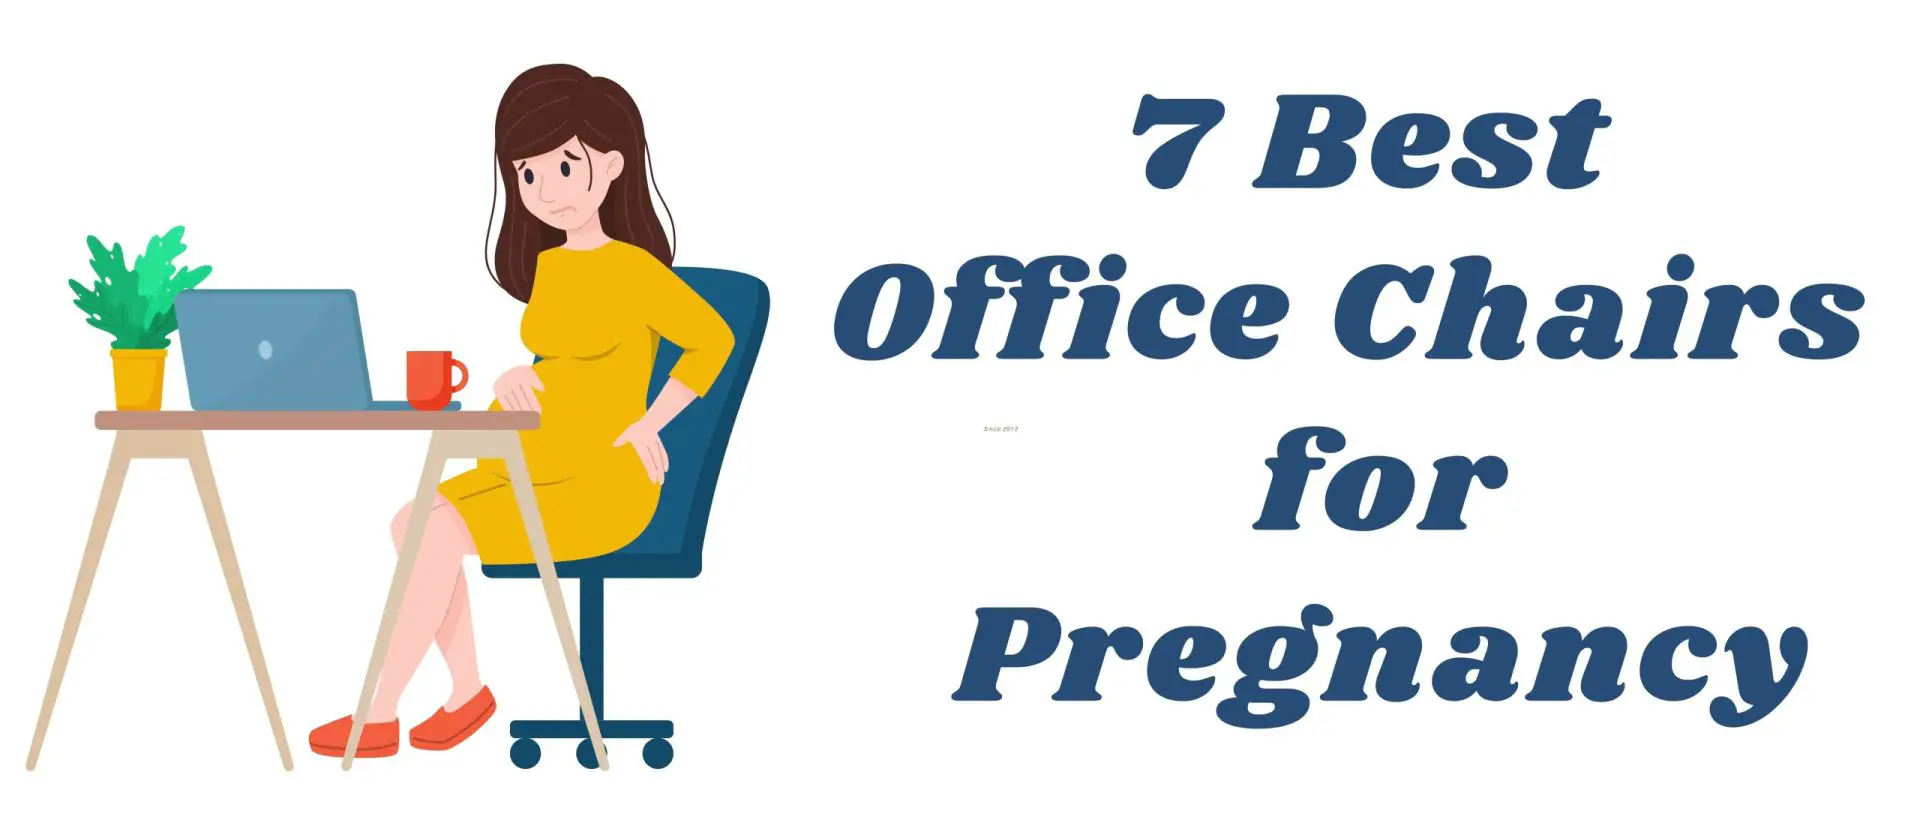 7 Best Office Chairs for Pregnancy